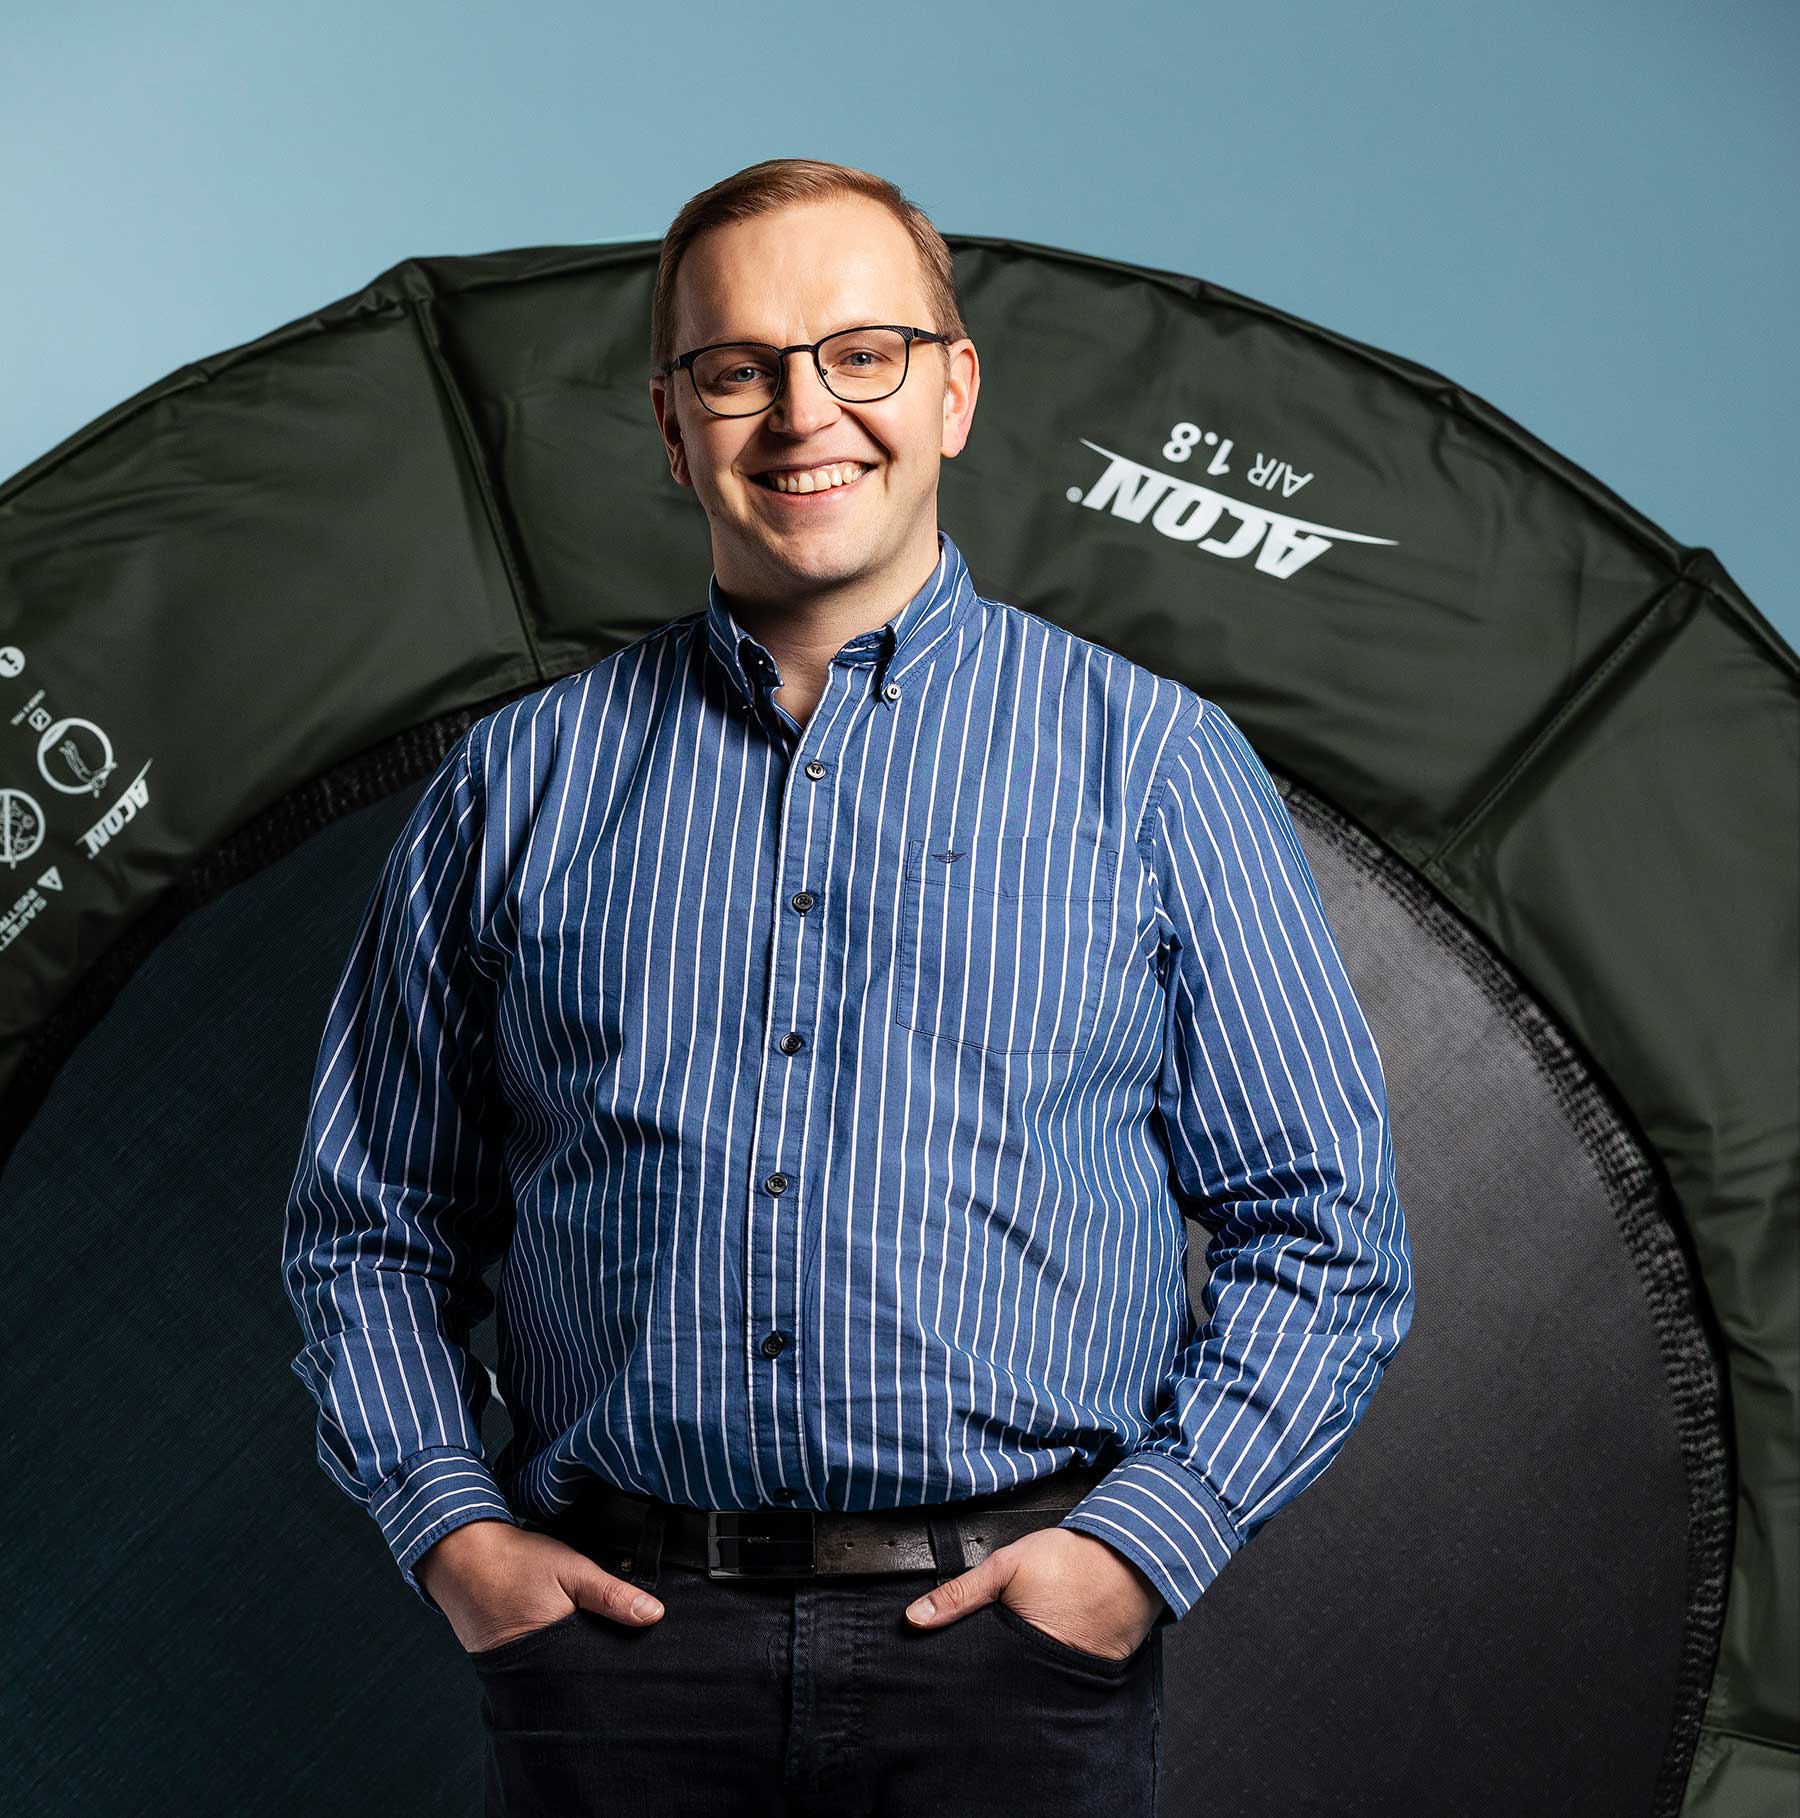 An image of Markus Lohi, the R&D Director at ACON, with trampoline in the background.